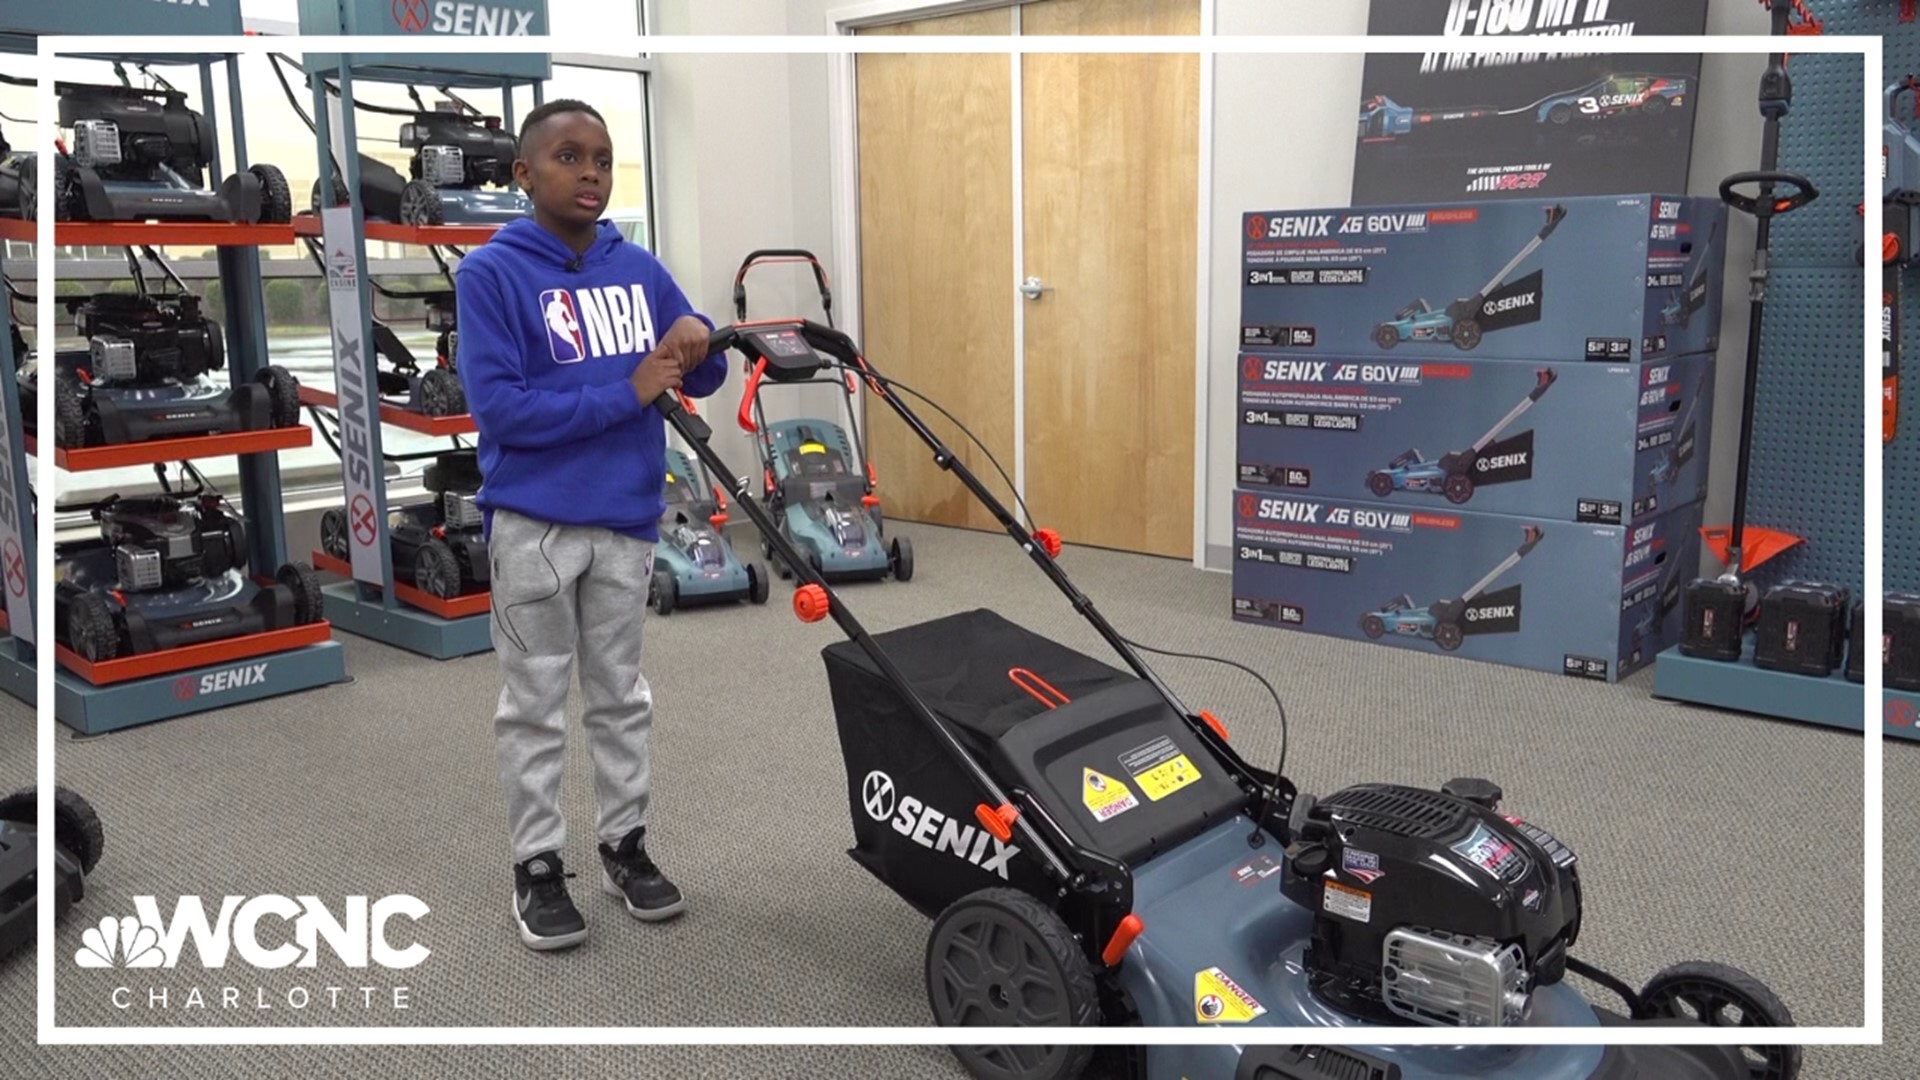 Quentin Hines has a passion most kids his age don't have. He loves mowing lawns!